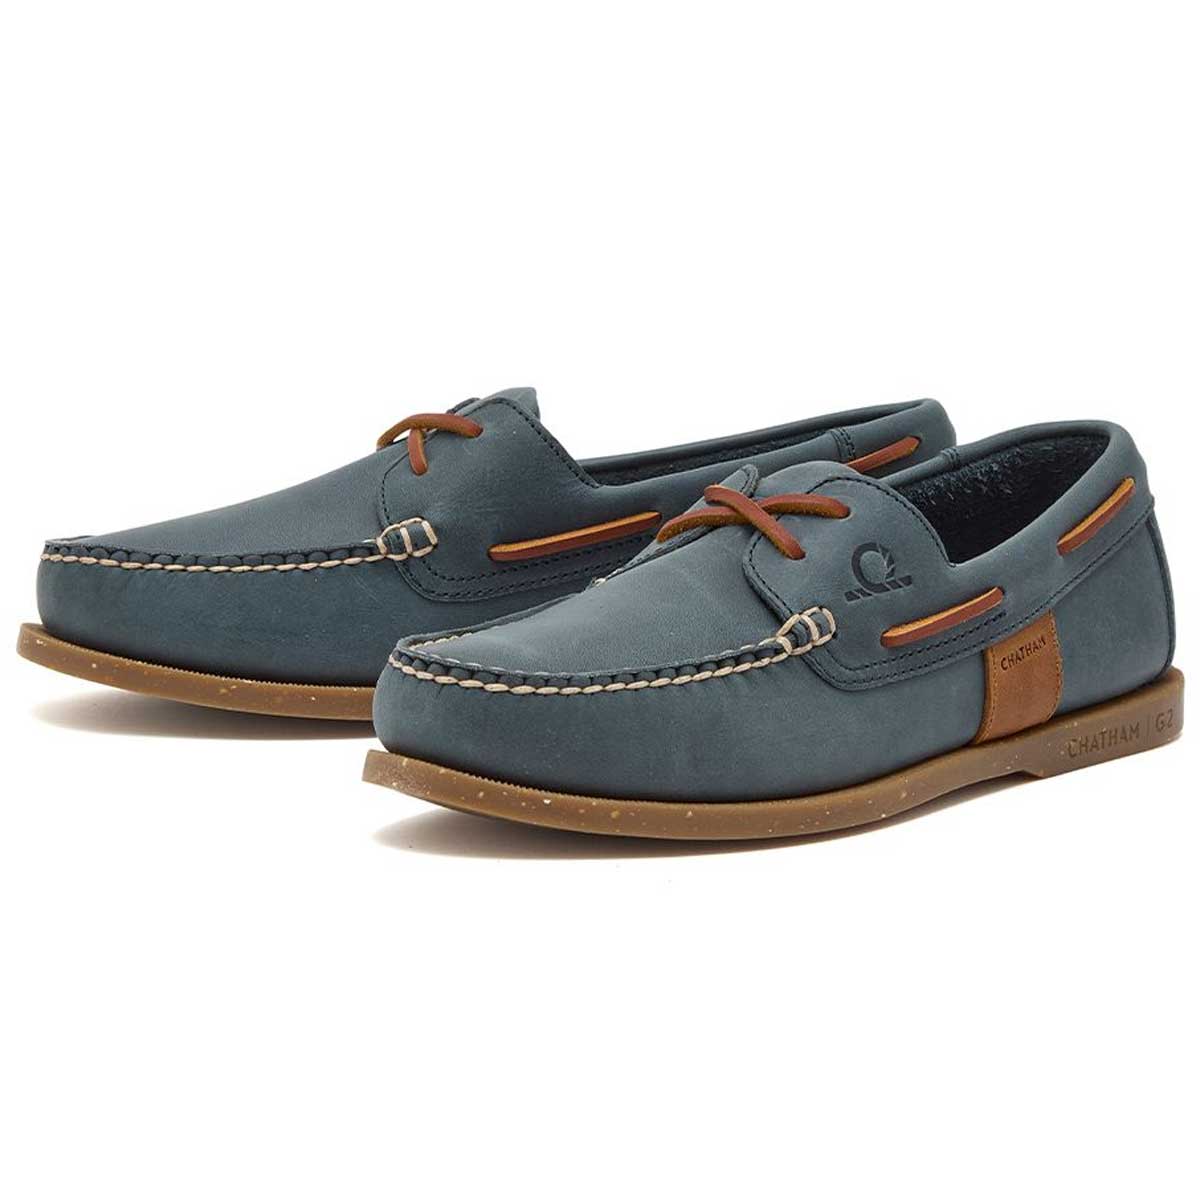 CHATHAM Java II G2 Leather Sustainable Deck Shoes - Men's - China Blue